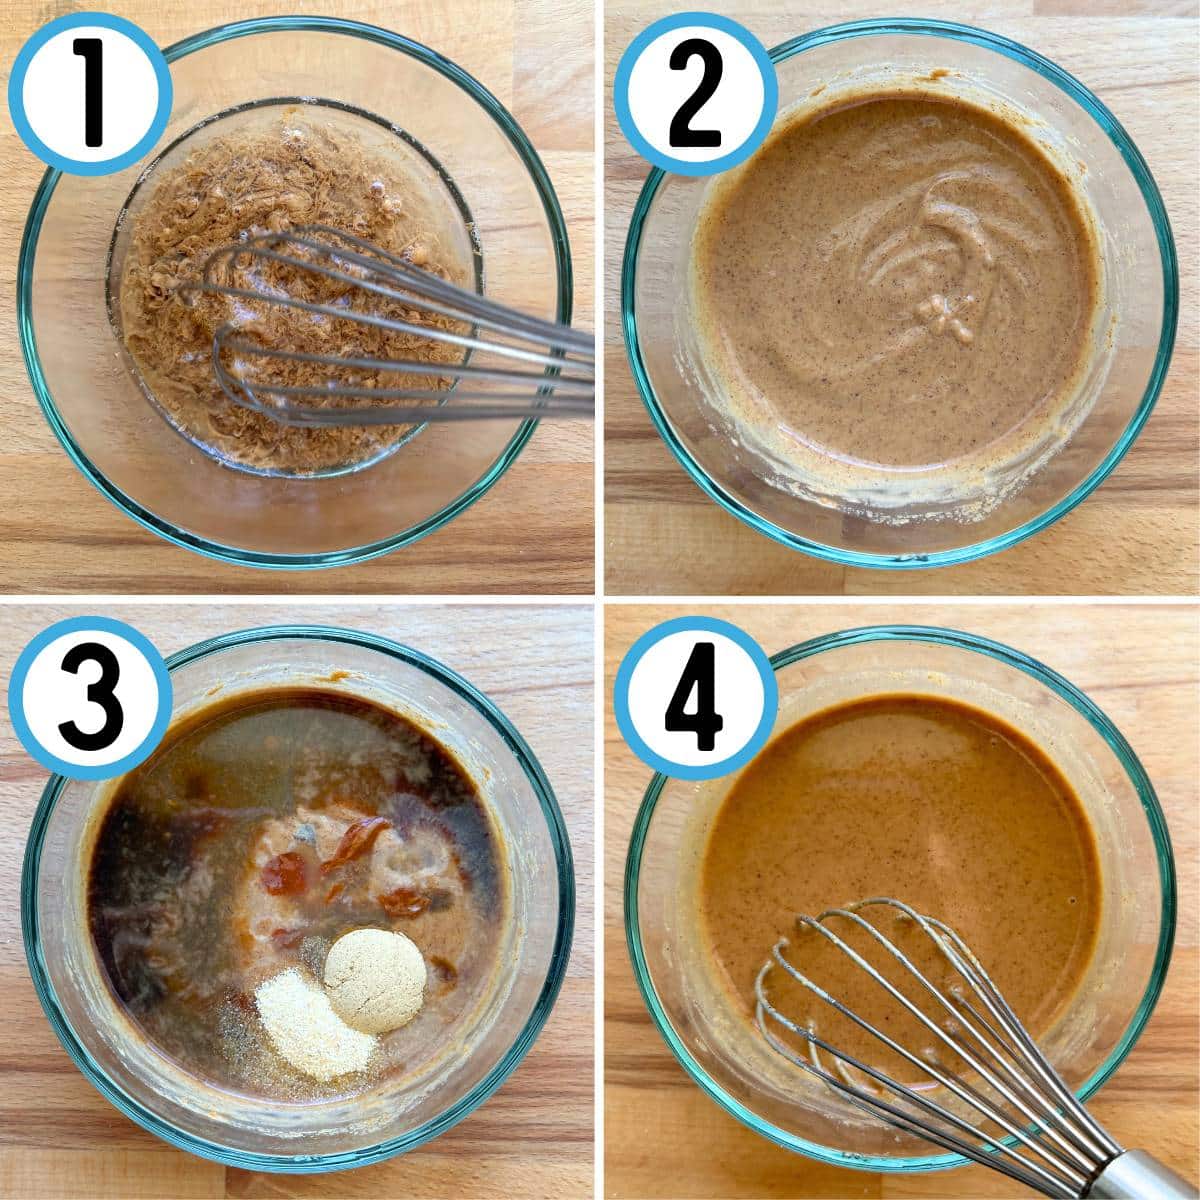 Step by step guide to making almond sauce. 1. Combine water and almond butter. 2. Whisk until your reach a smooth consistency. 3. Add remaining ingredients. 4. Whisk until the smooth almond sauce is formed.